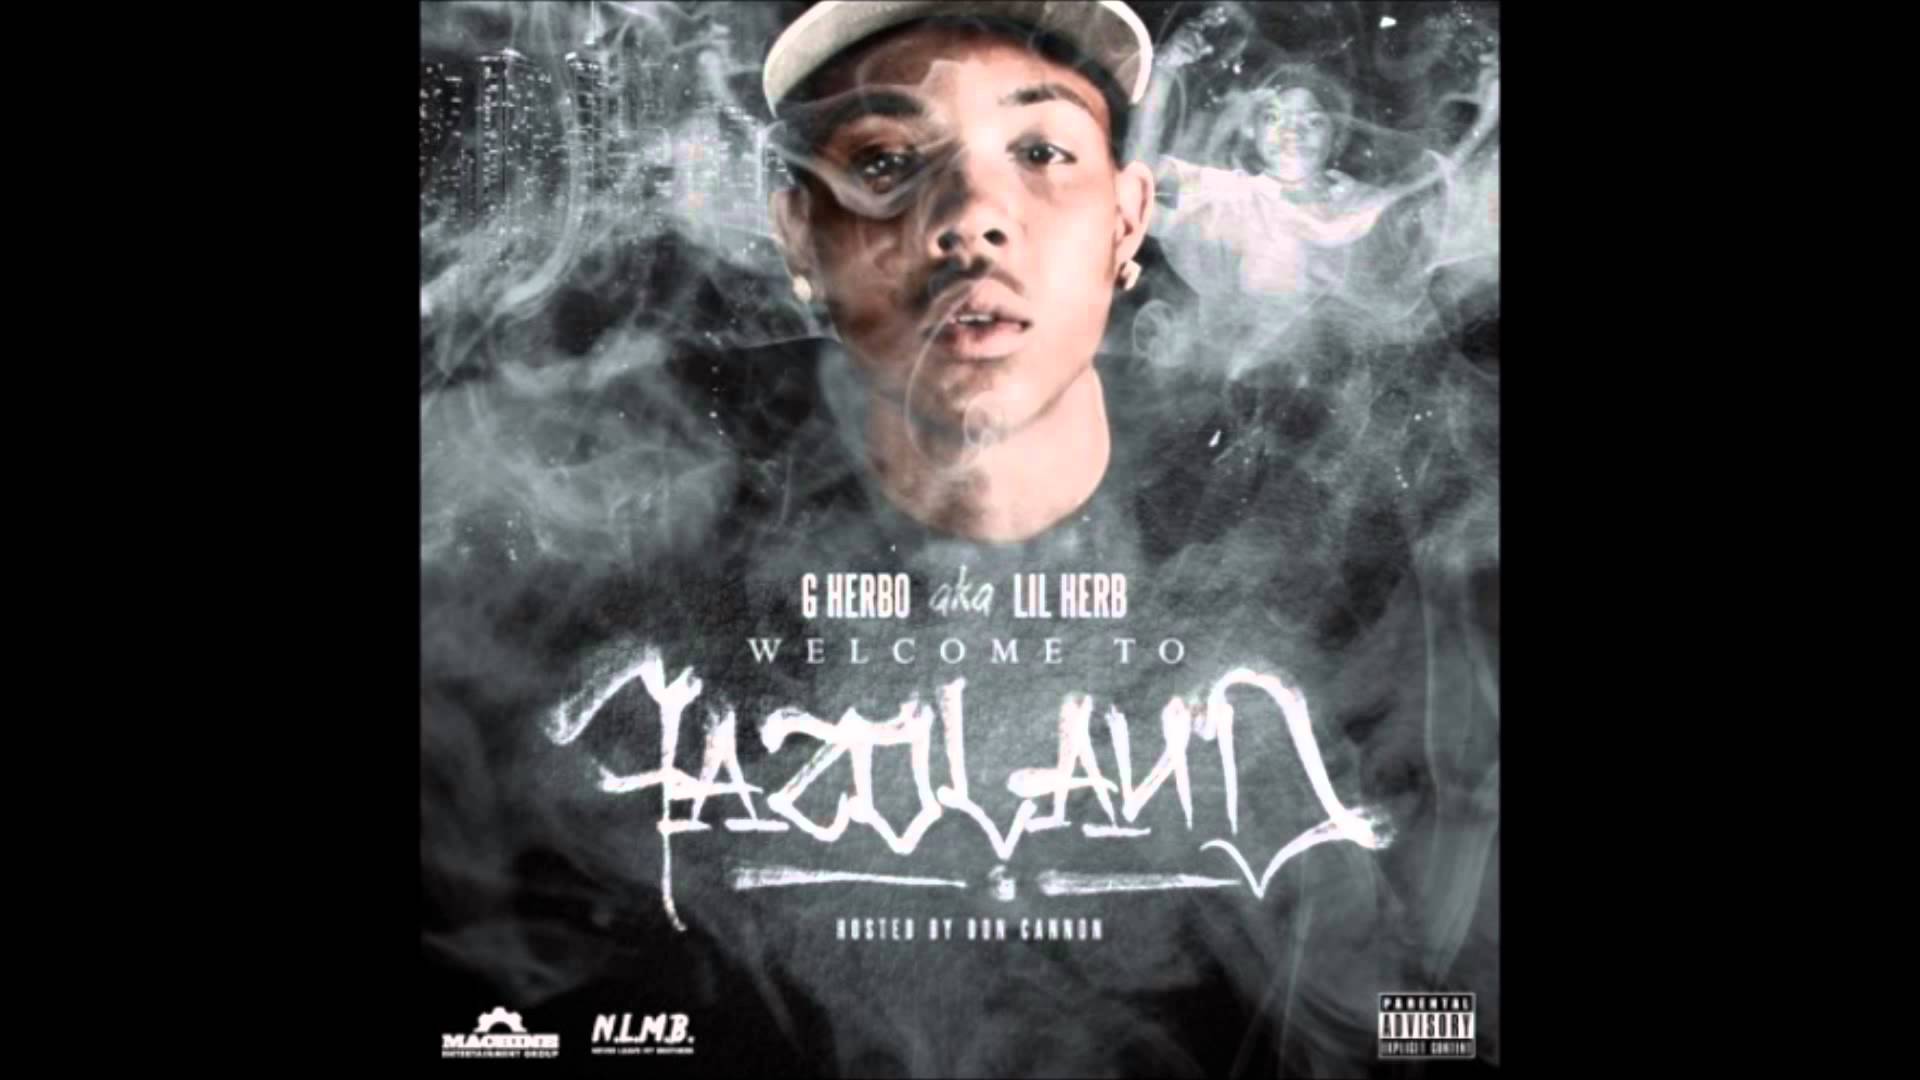 G herbo Fucked Up (Welcome to Fazoland)